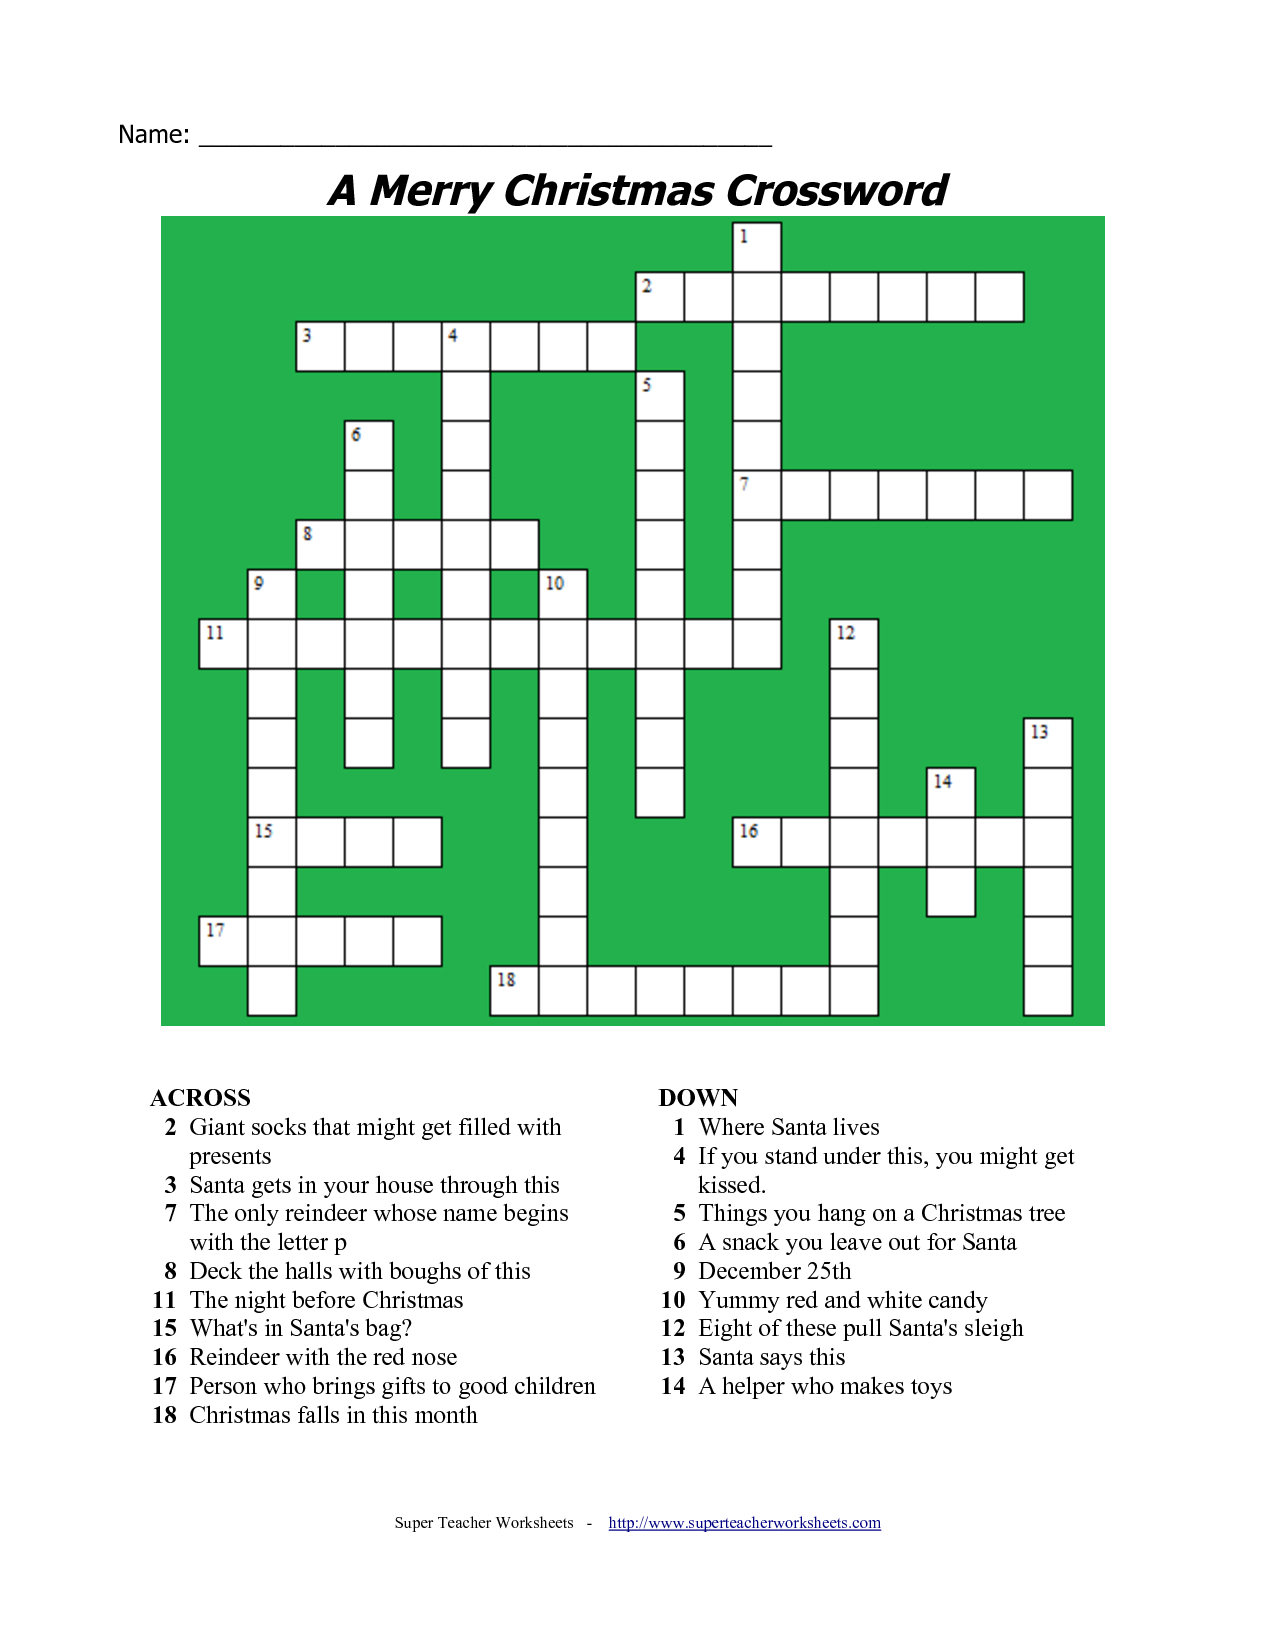 Crossword Puzzle Answers And Solutions Pdf Printitfree Crosswords Puzzle World